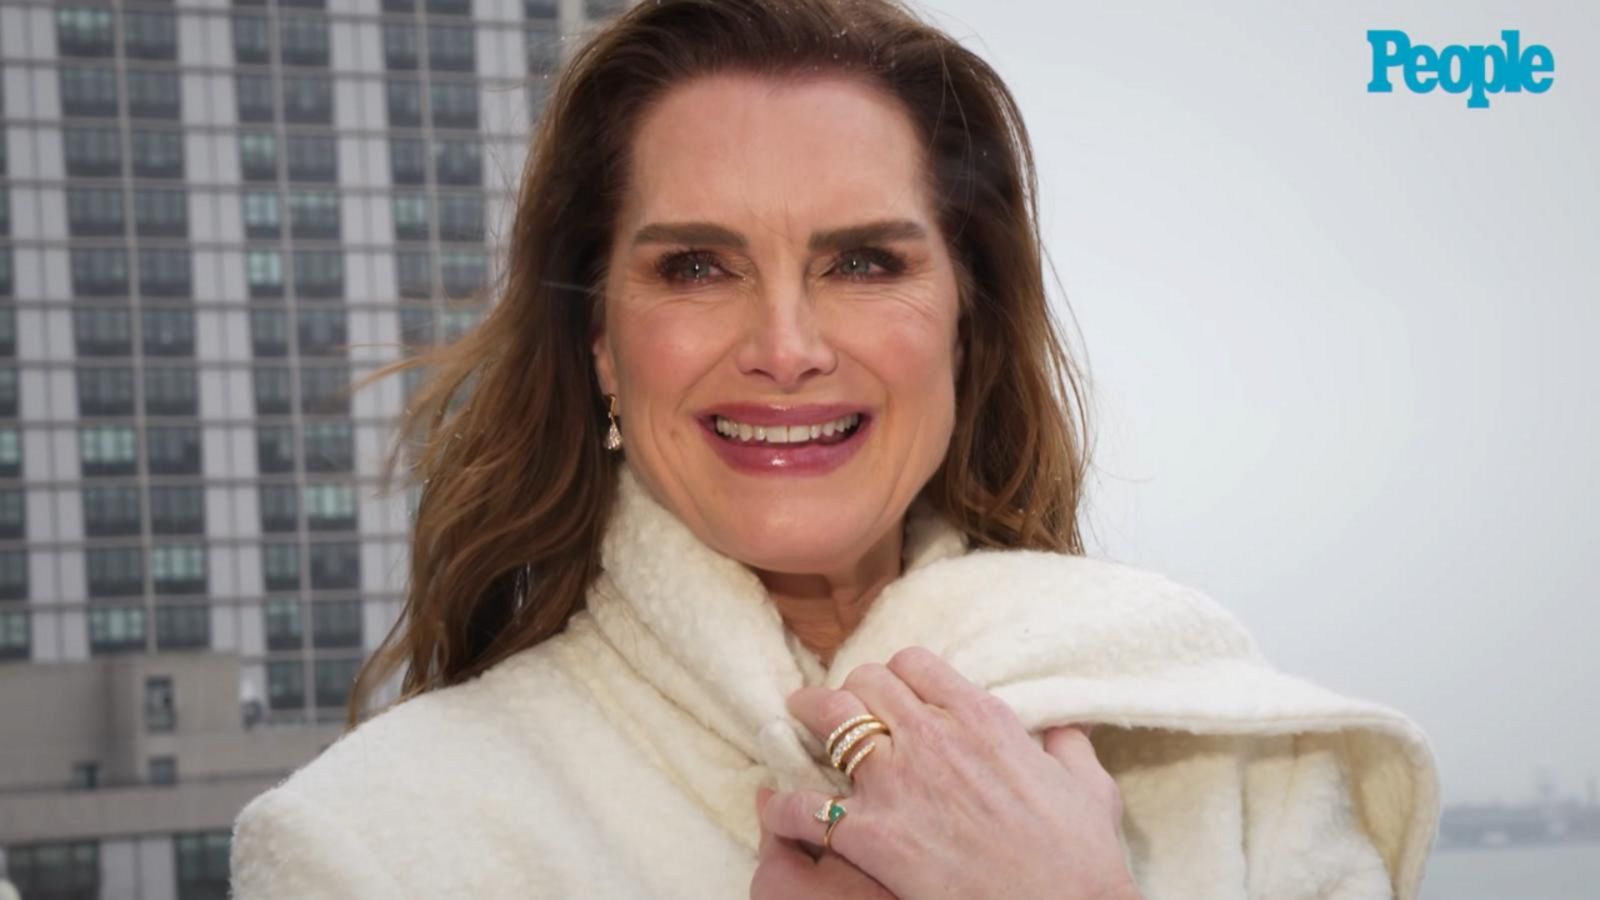 Brooke Shields Opens Up About Finding Her Way And Her Voice Good